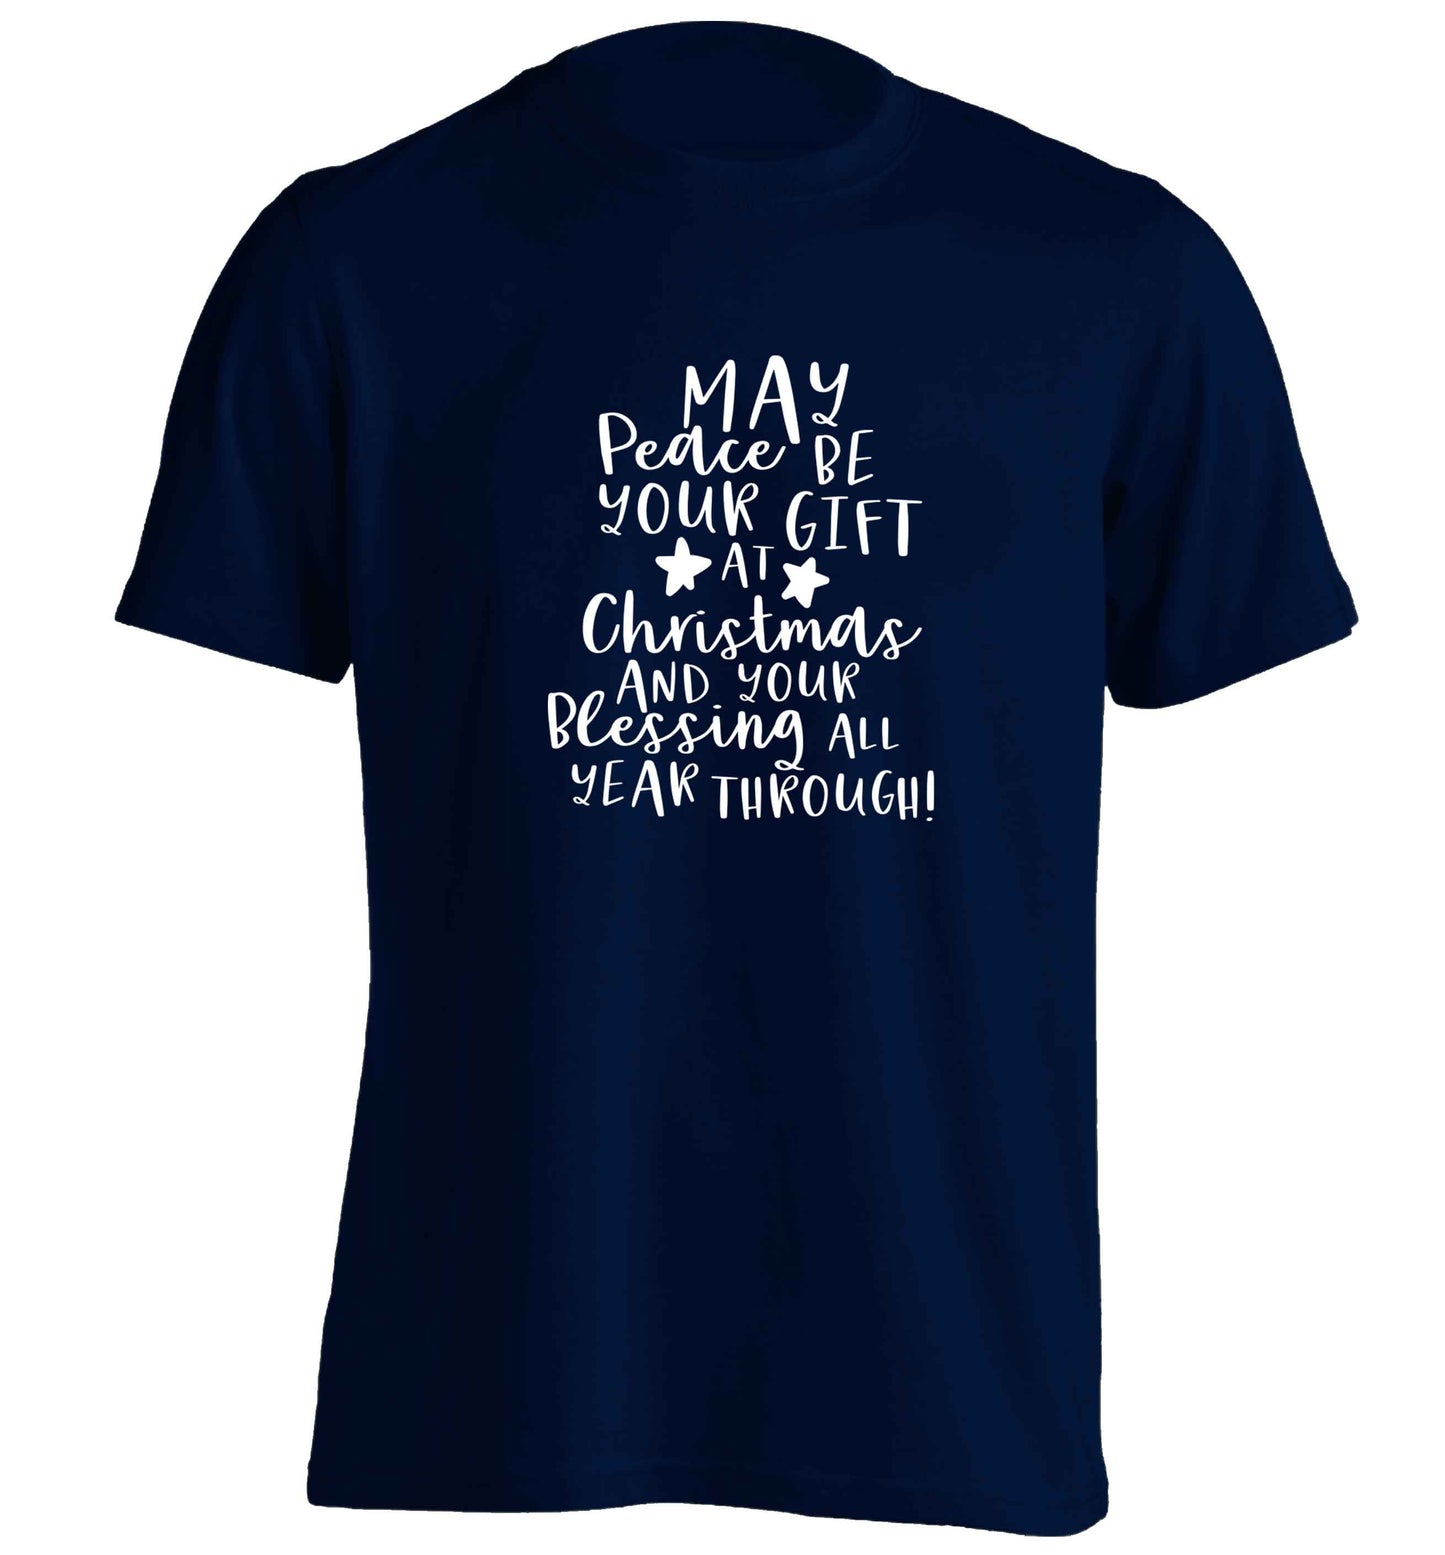 Peace be your Gift at Christmas Gift adults unisex navy Tshirt 2XL